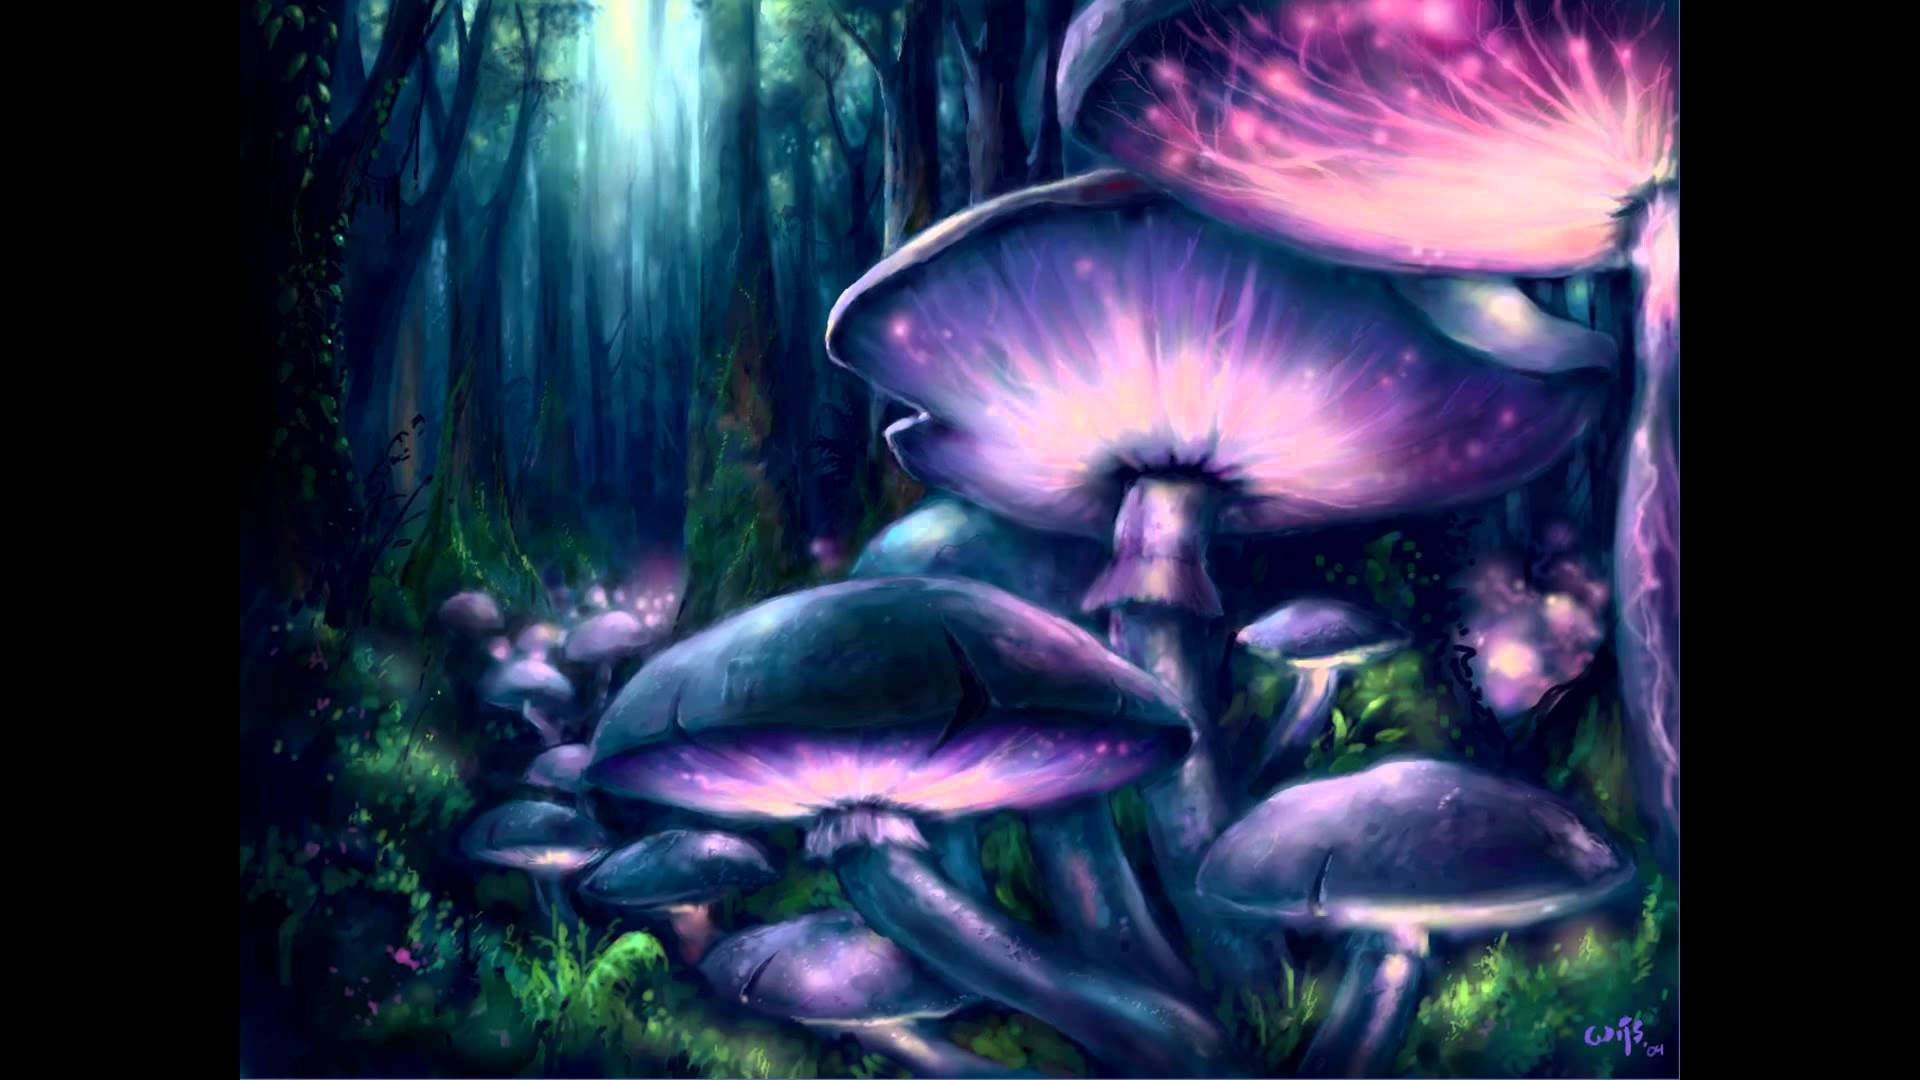 "The beauty of the psychedelic mushroom" Wallpaper